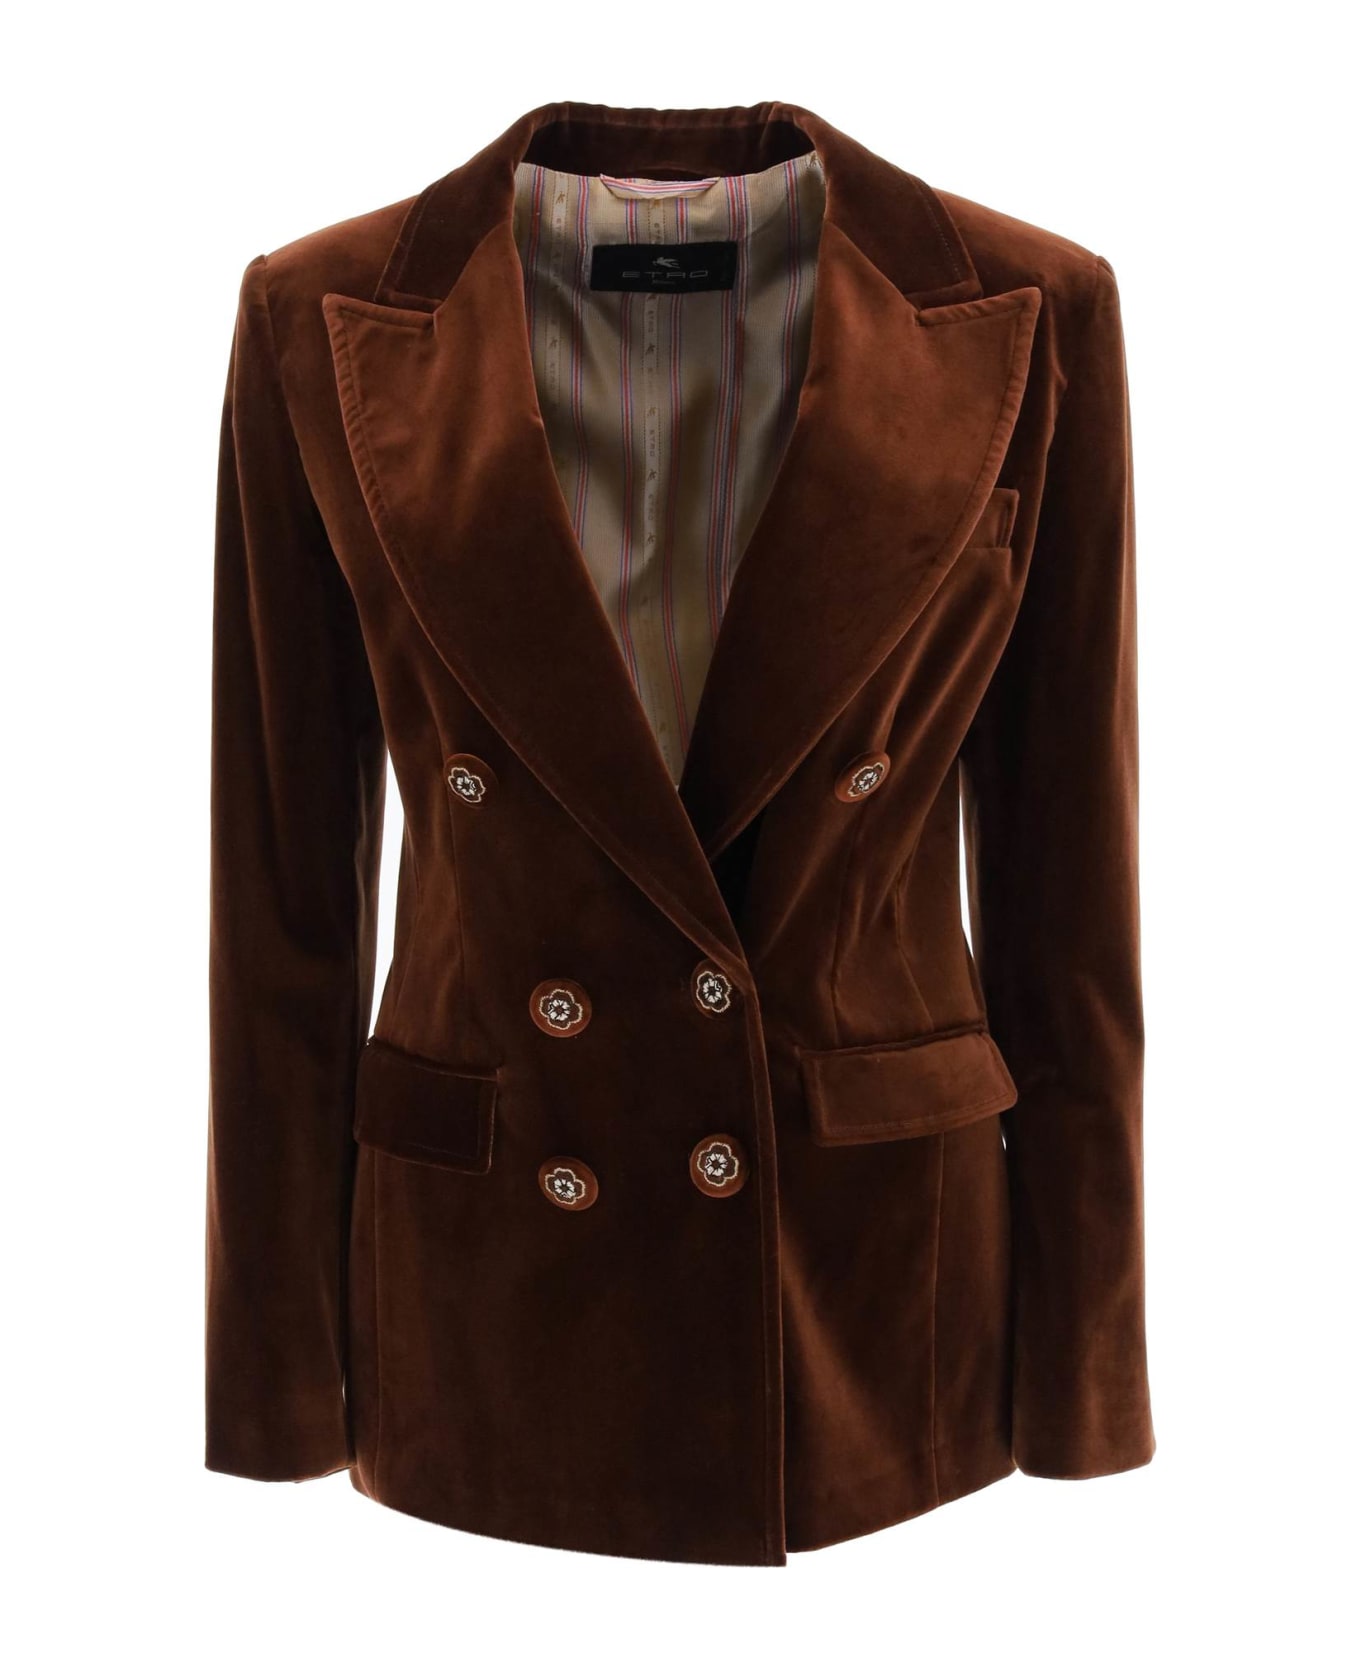 Etro Double-breasted Jacket - BROWN (Brown) ブレザー